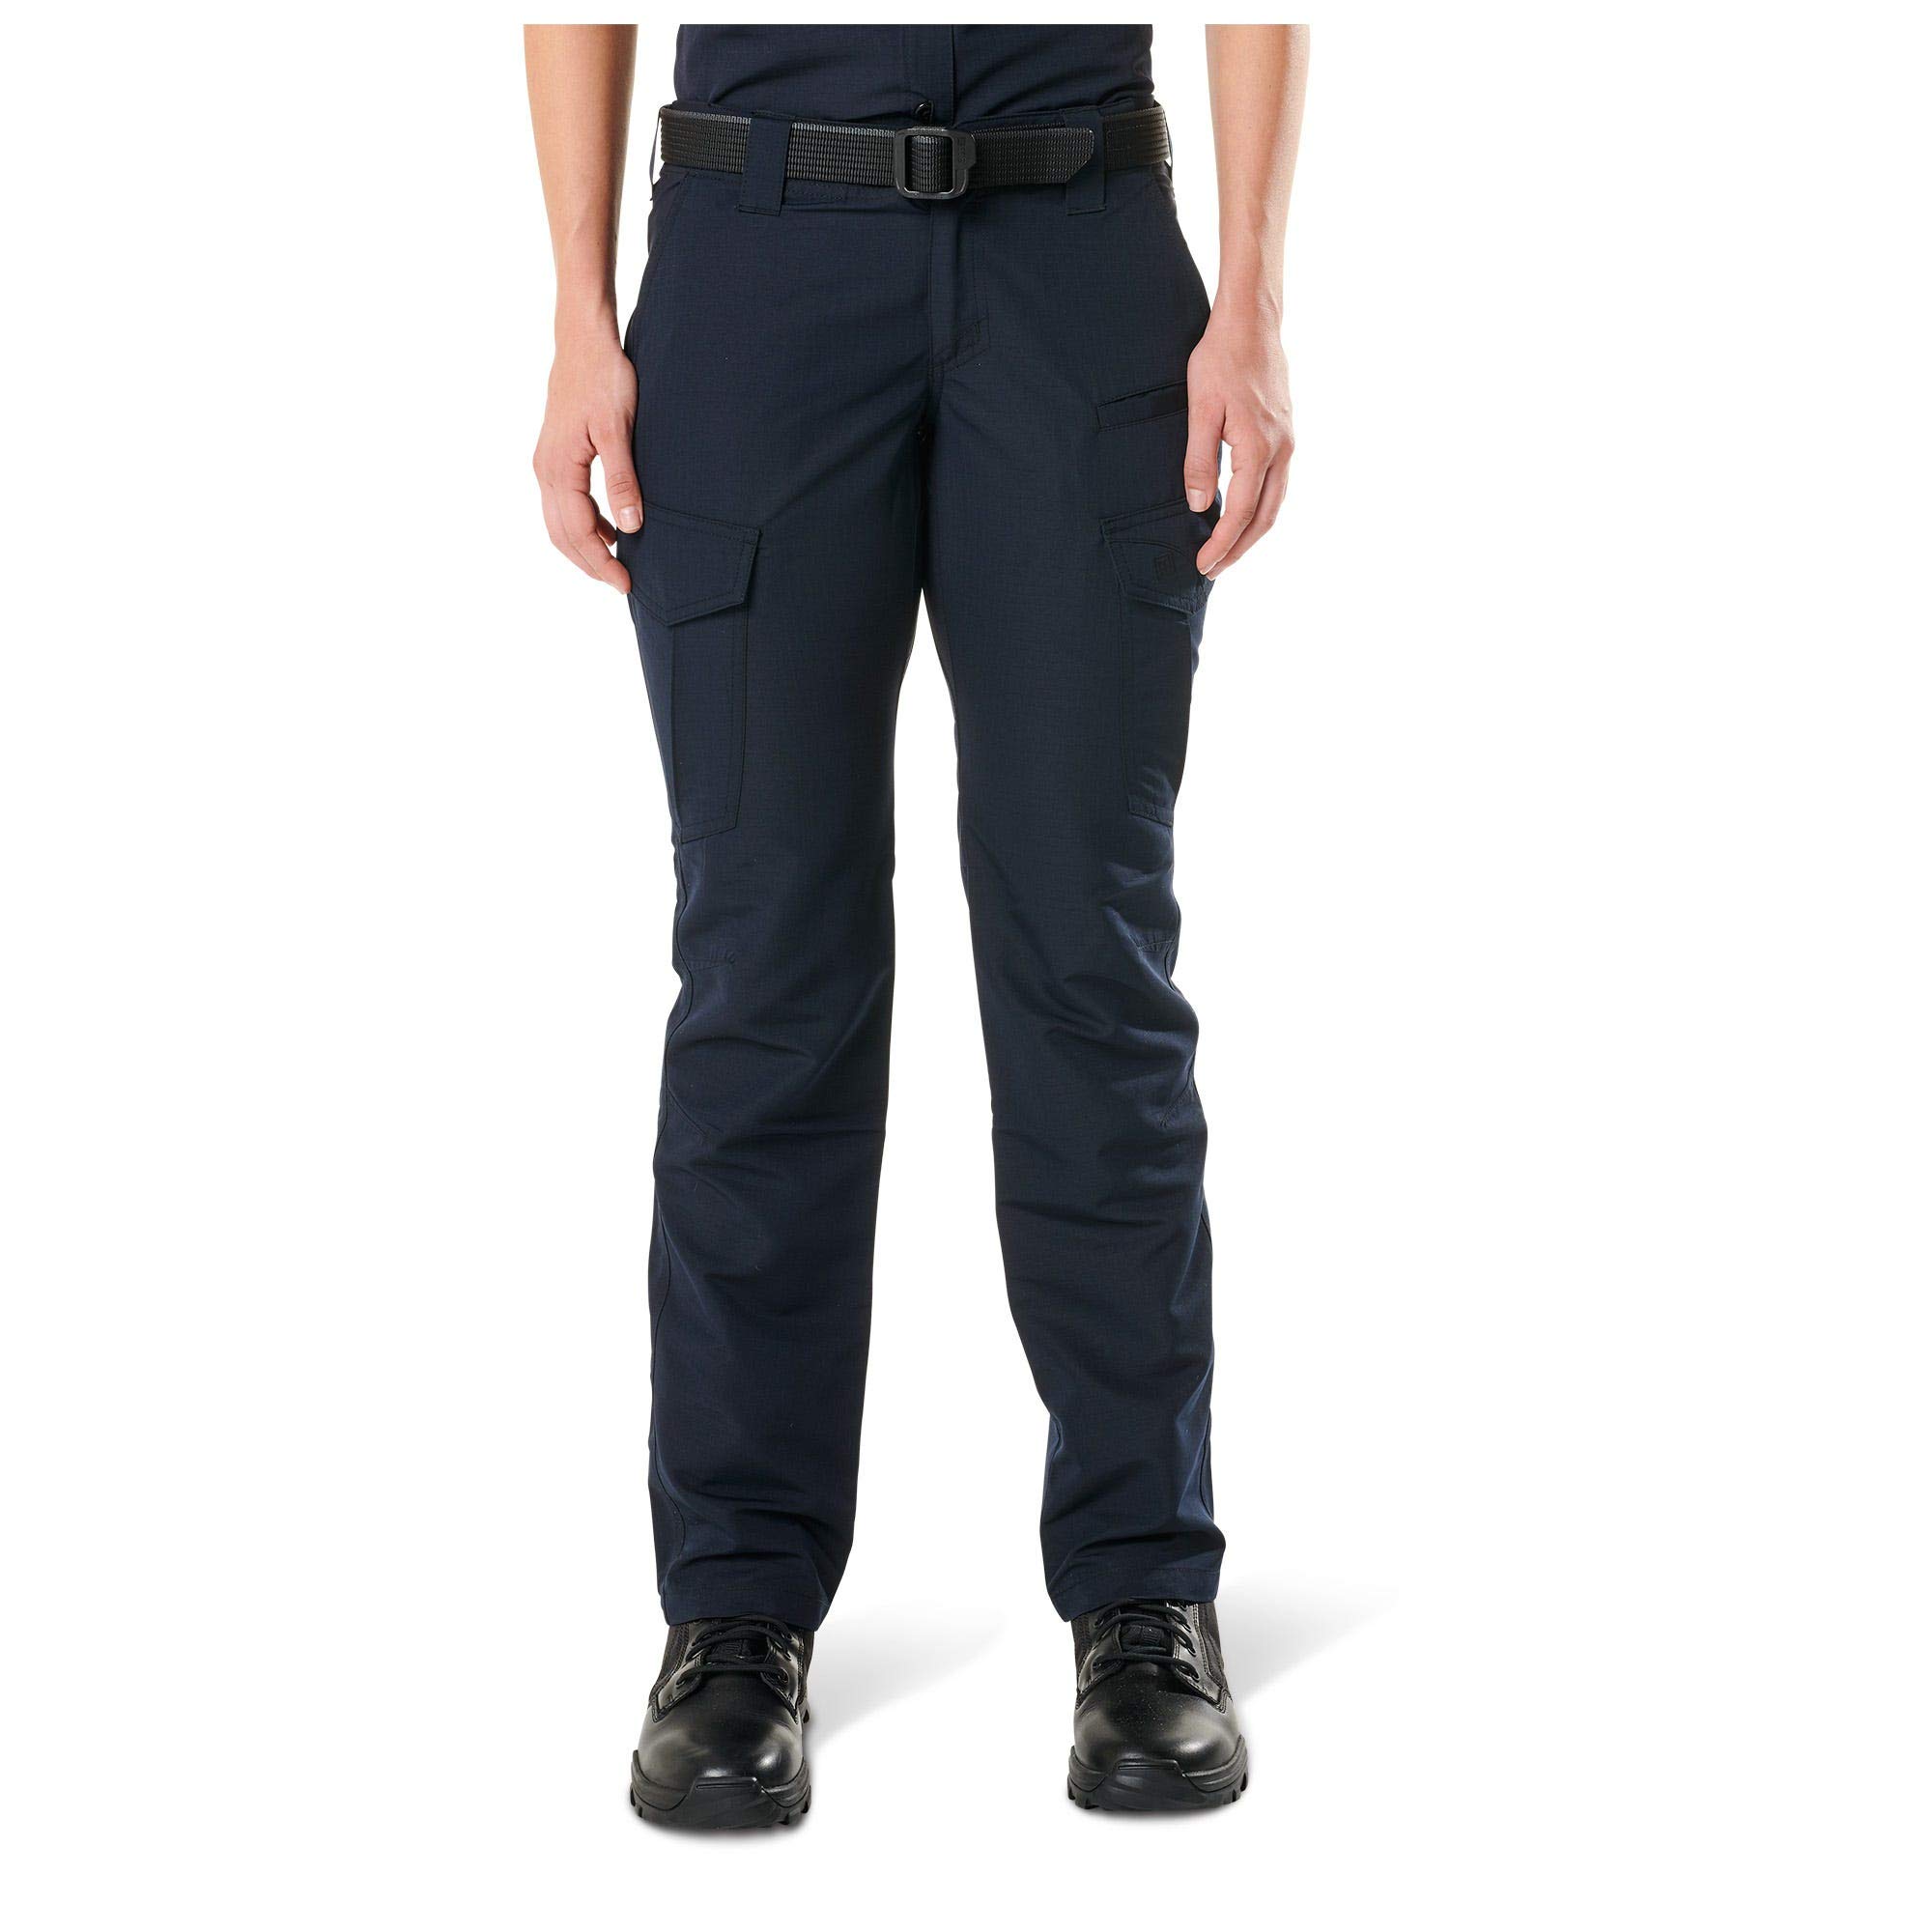 5.11 Tactical Women's Fast-Tac Cargo Professional Uniform Pants, Polyester Ripstop, Style 64419